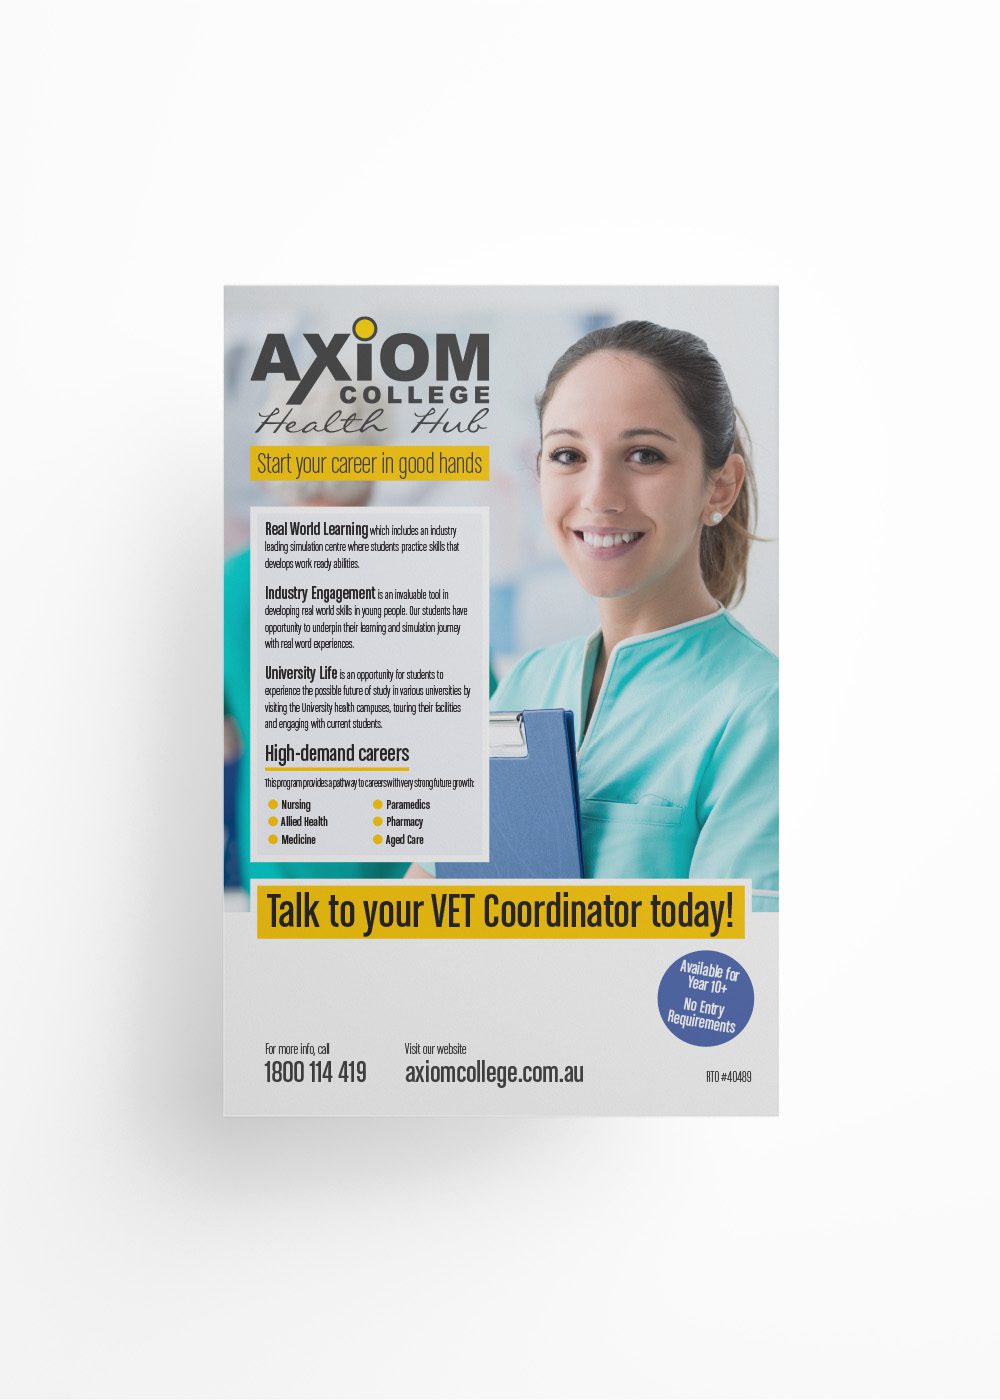 Axiom College - Poster